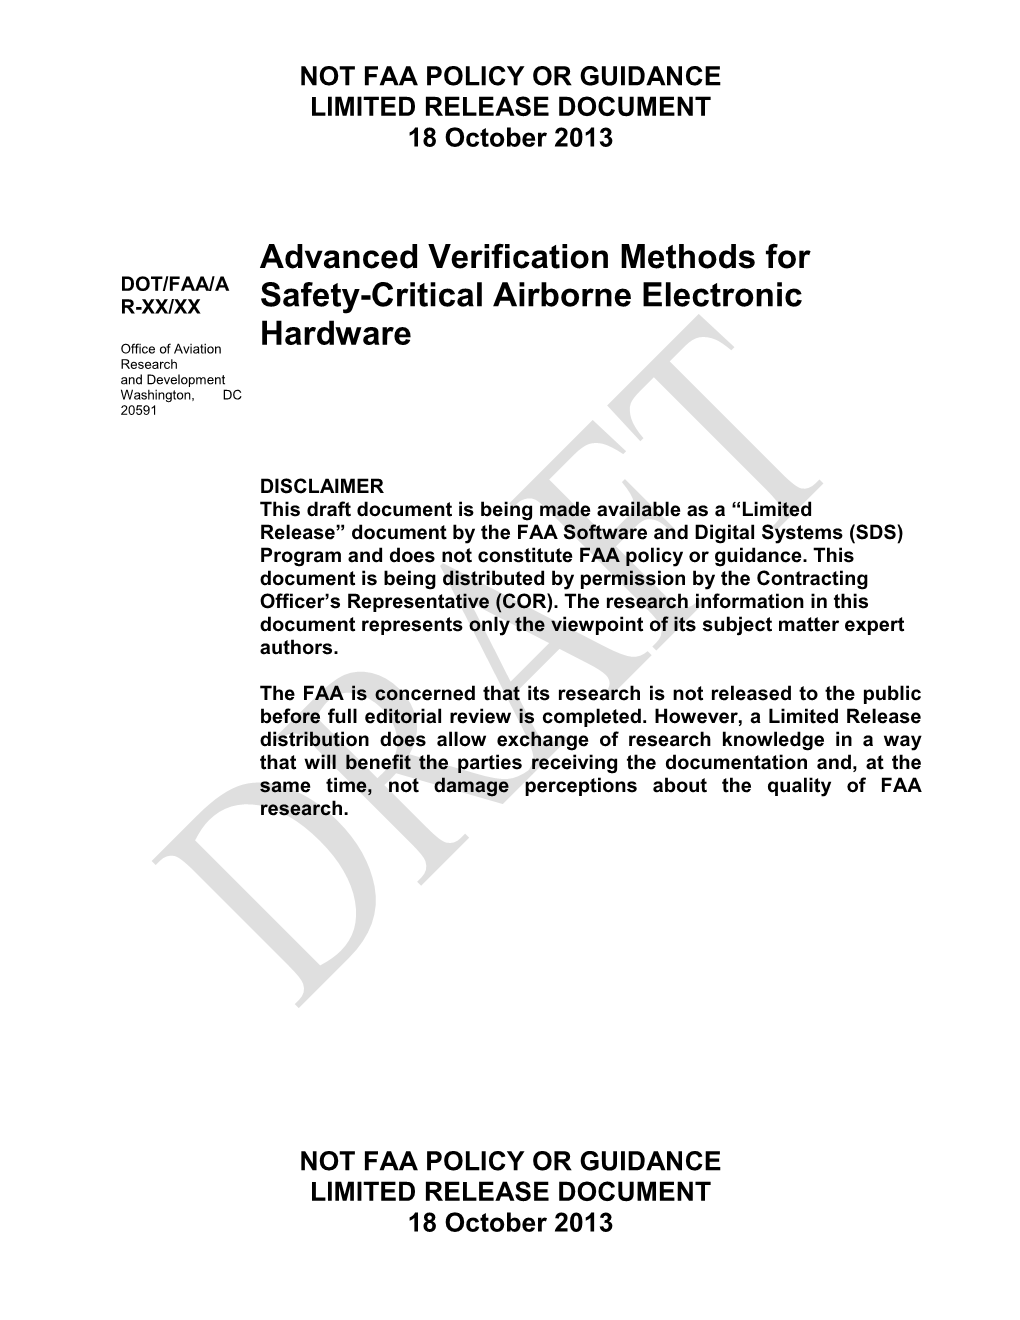 Advanced Verification Methods for Safety-Critical Airborne Electronic Hardware